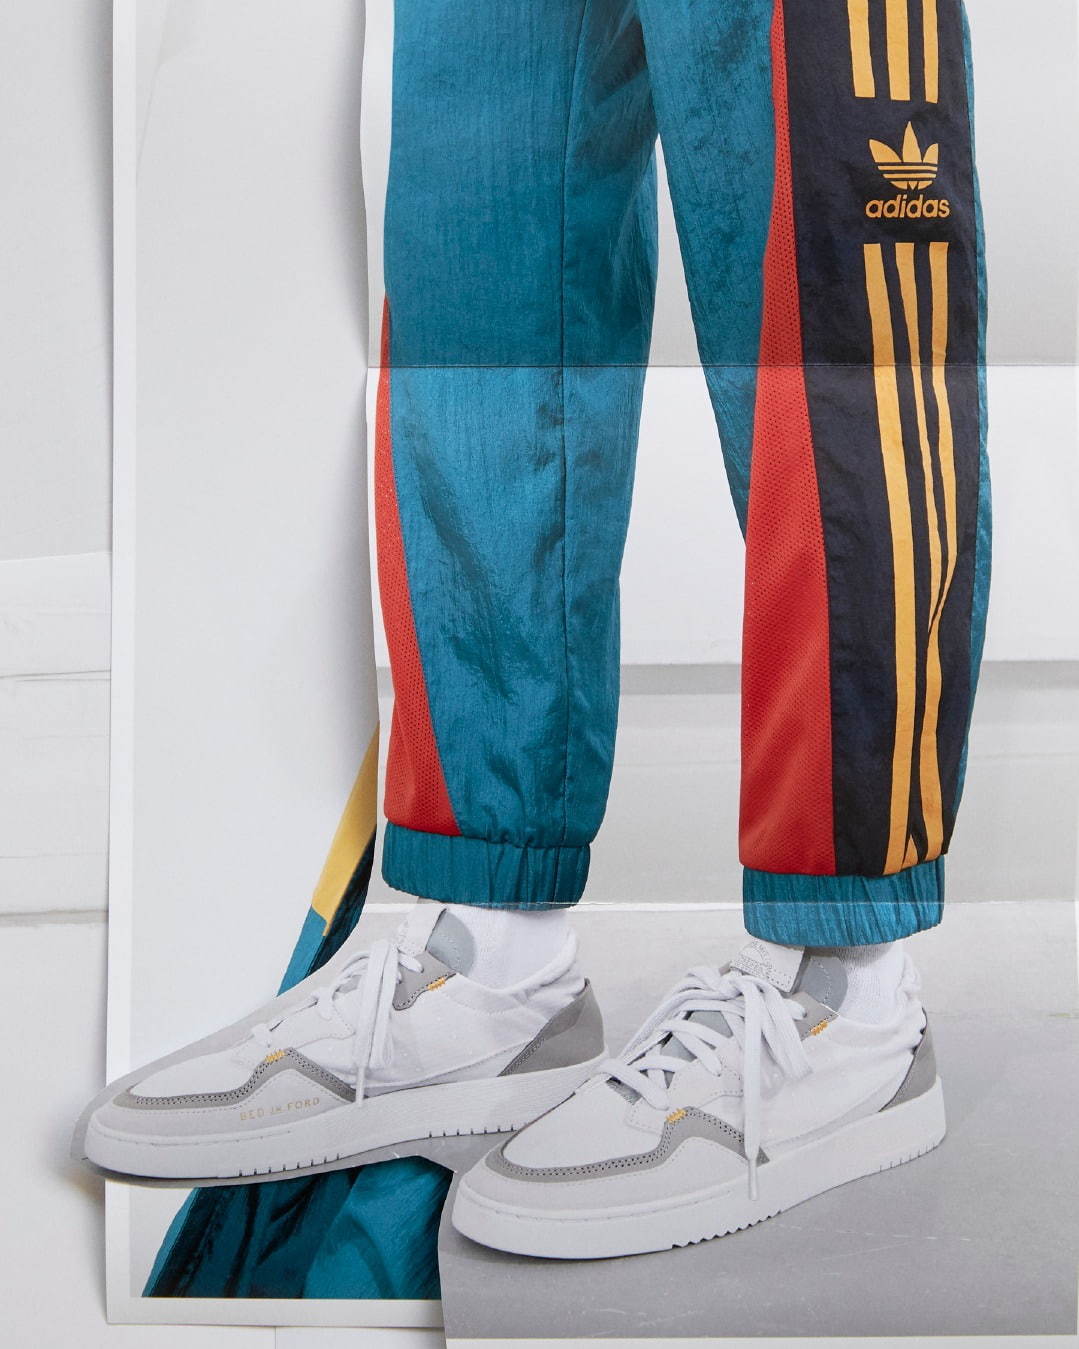 adidas Originals by BED J.W. FORD コート